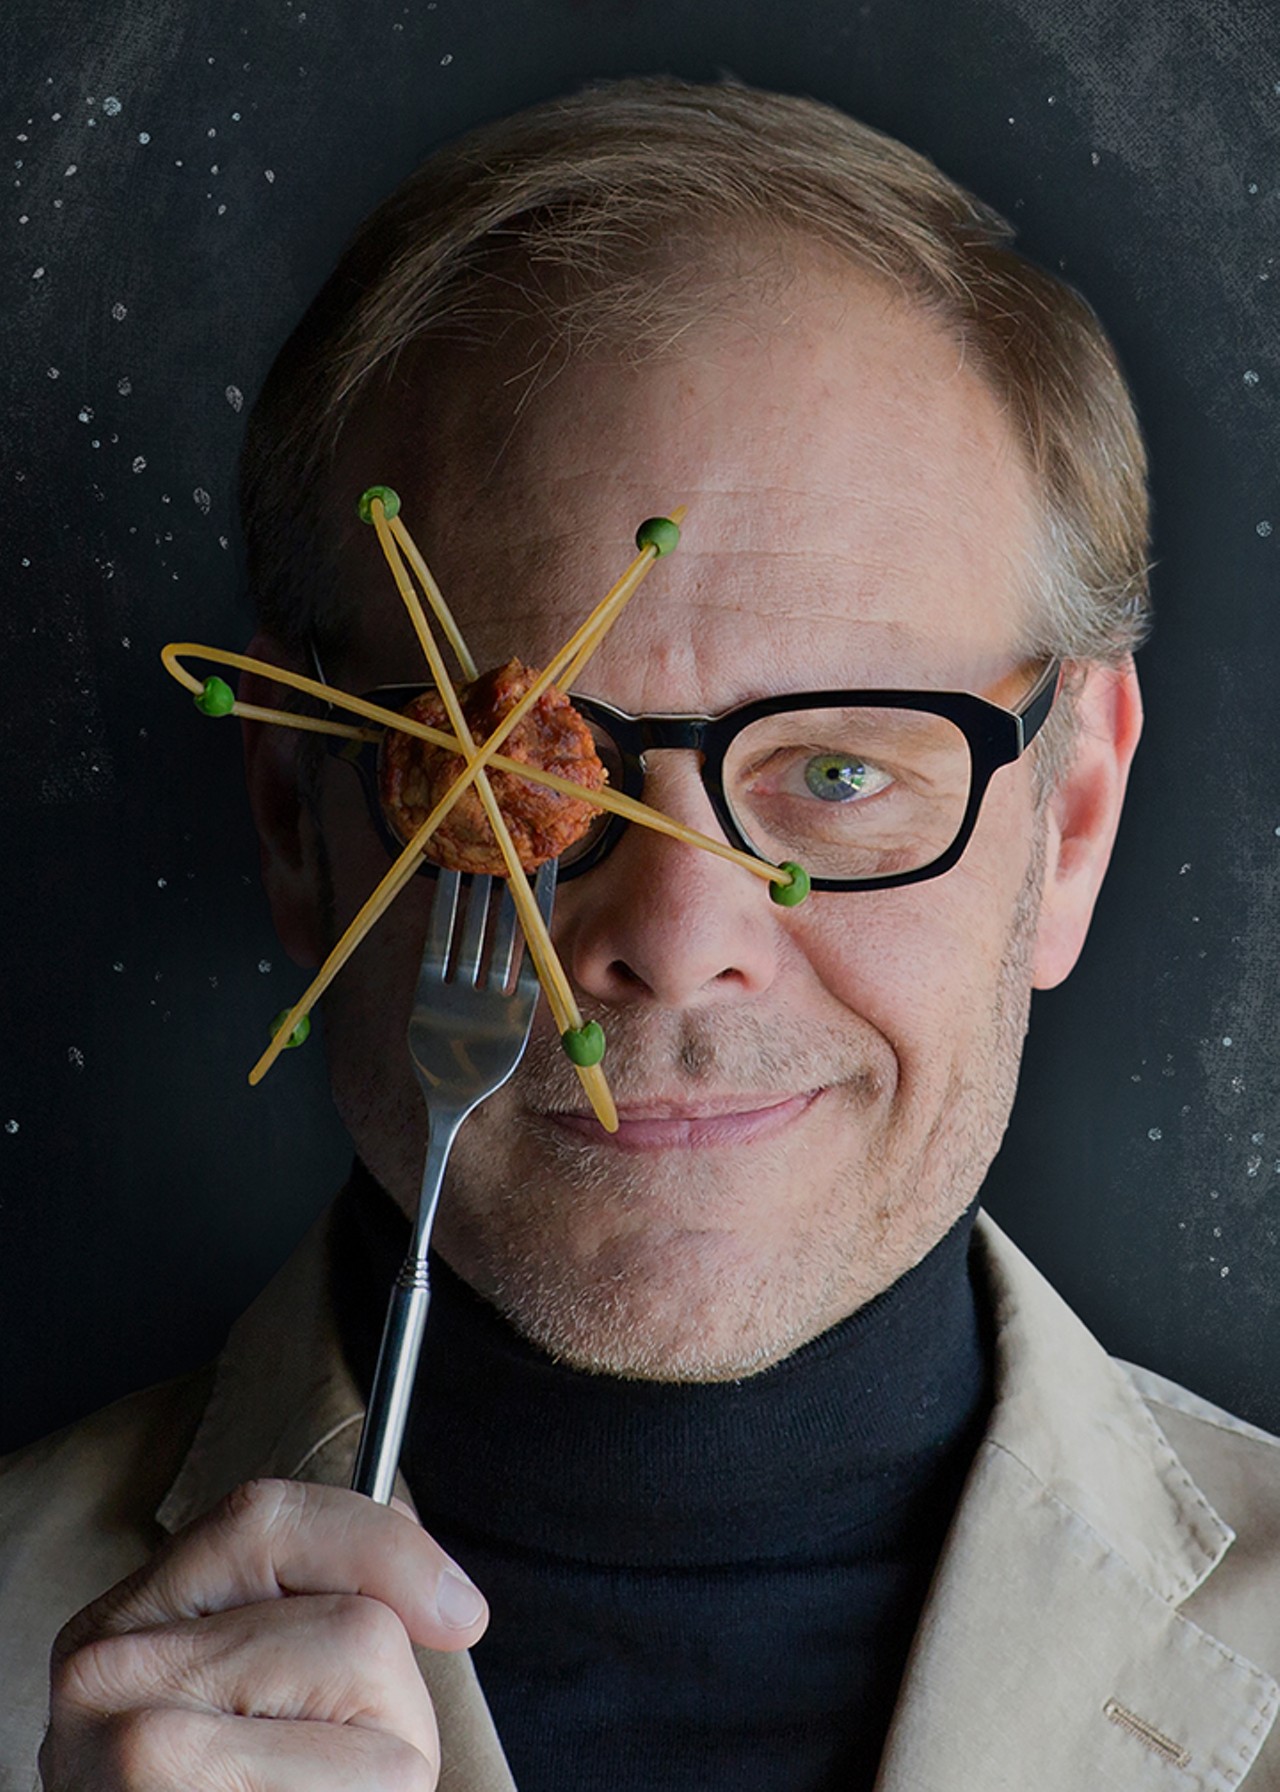 Saturday, April 22Alton Brown Live: Eat Your Science at the Dr. Phillips Center